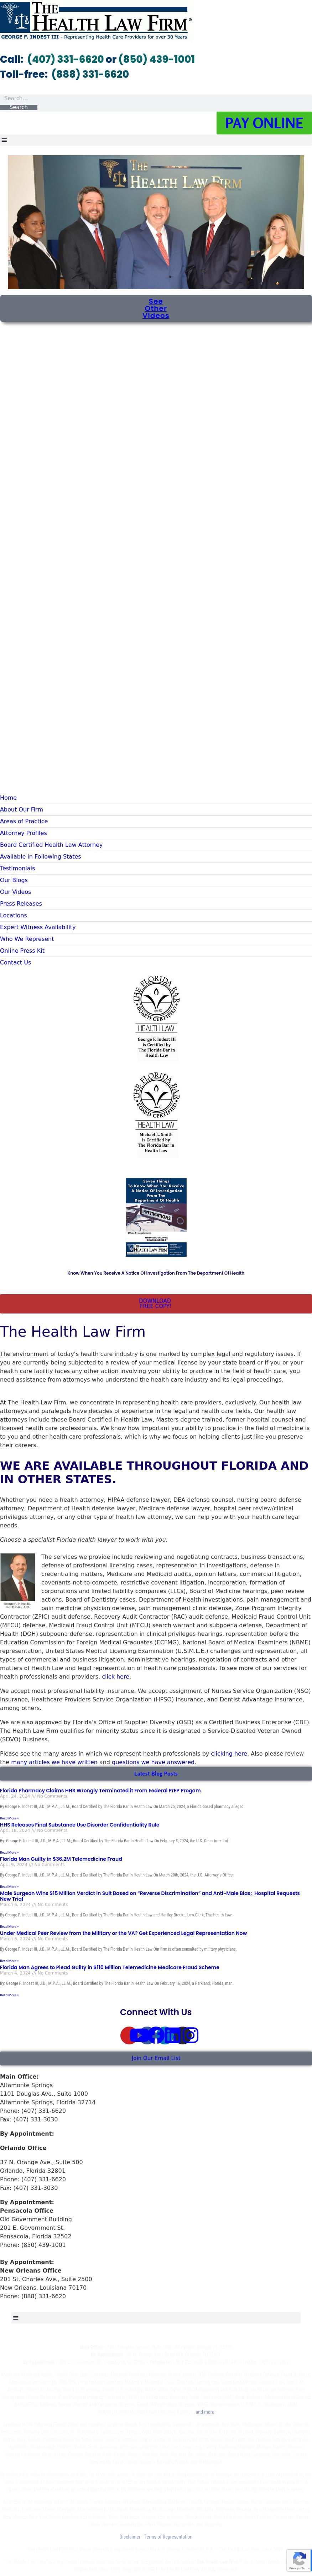 The Health Law Firm - Pensacola FL Lawyers